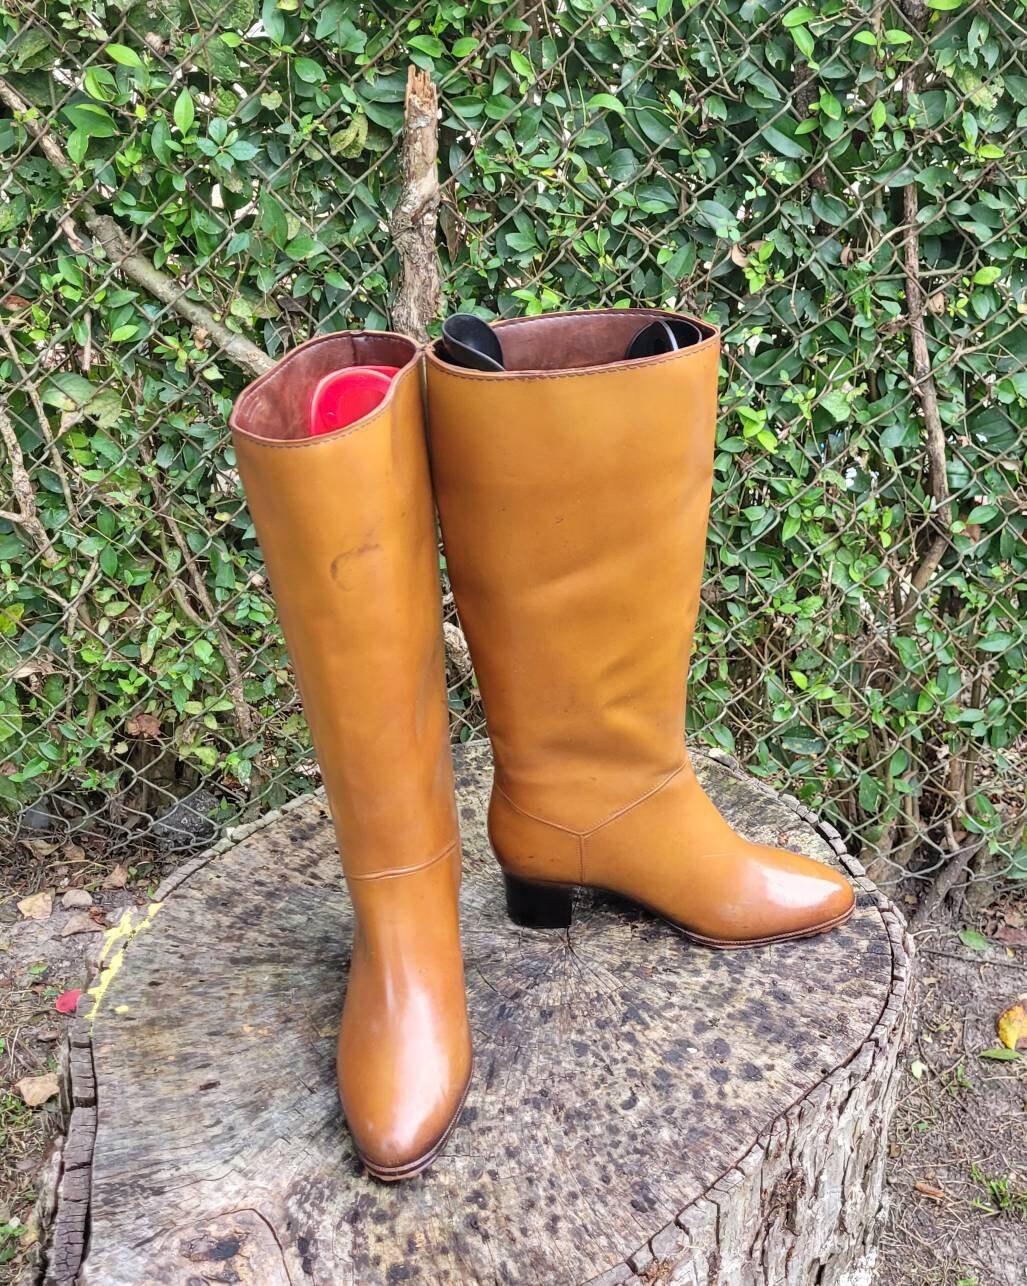 Vintage 1970s Tall Rain Boots For Women/Size 7 Rubber Fashion